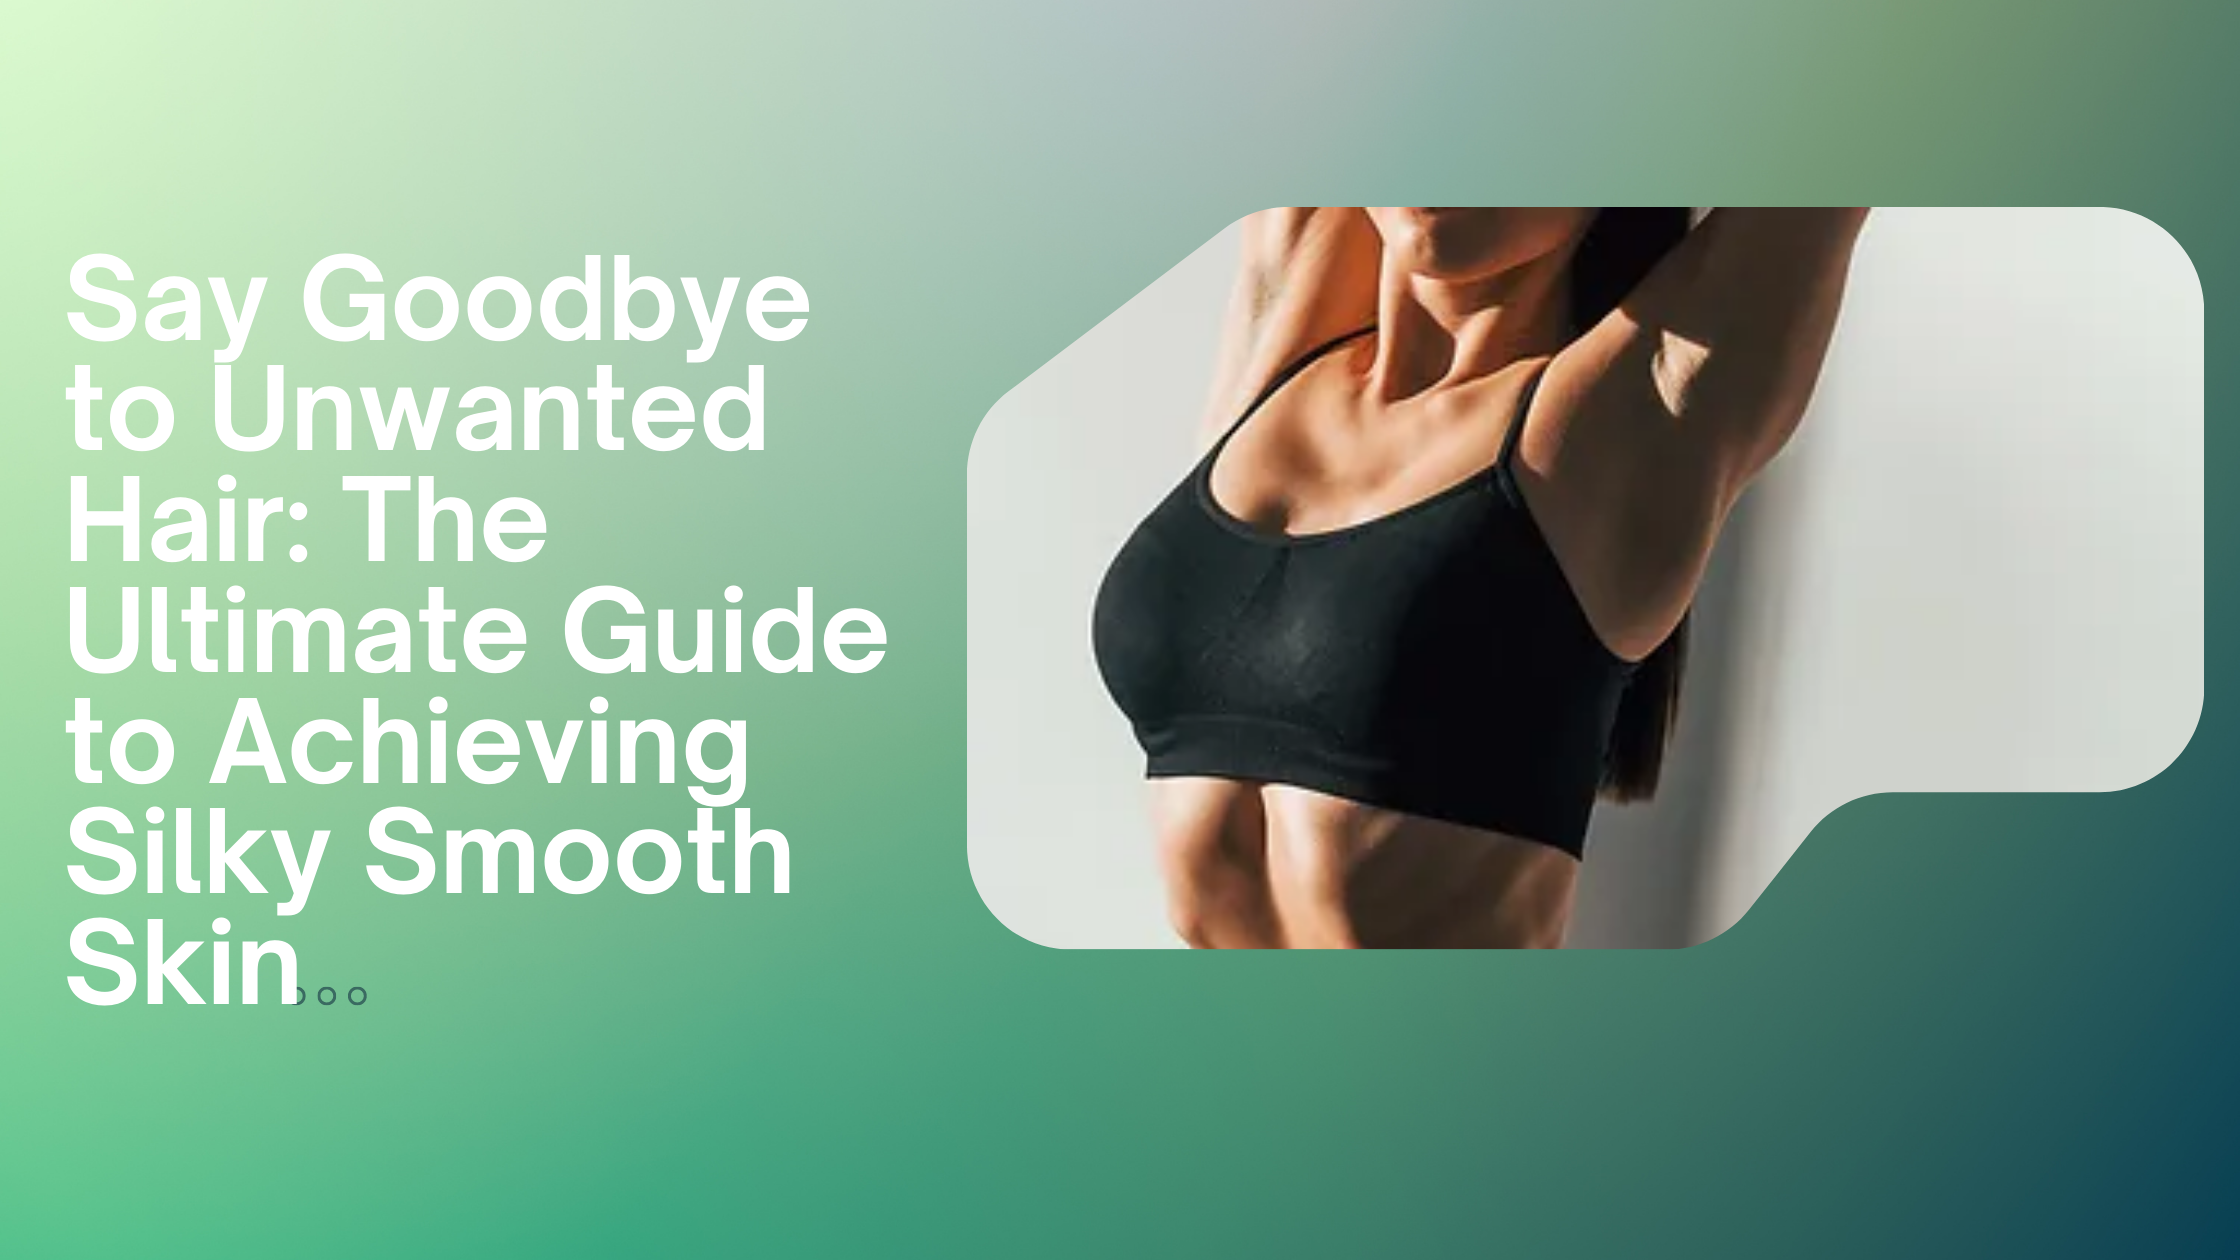 Say Goodbye to Unwanted Hair: The Ultimate Guide to Achieving Silky Smooth Skin | Zupyak